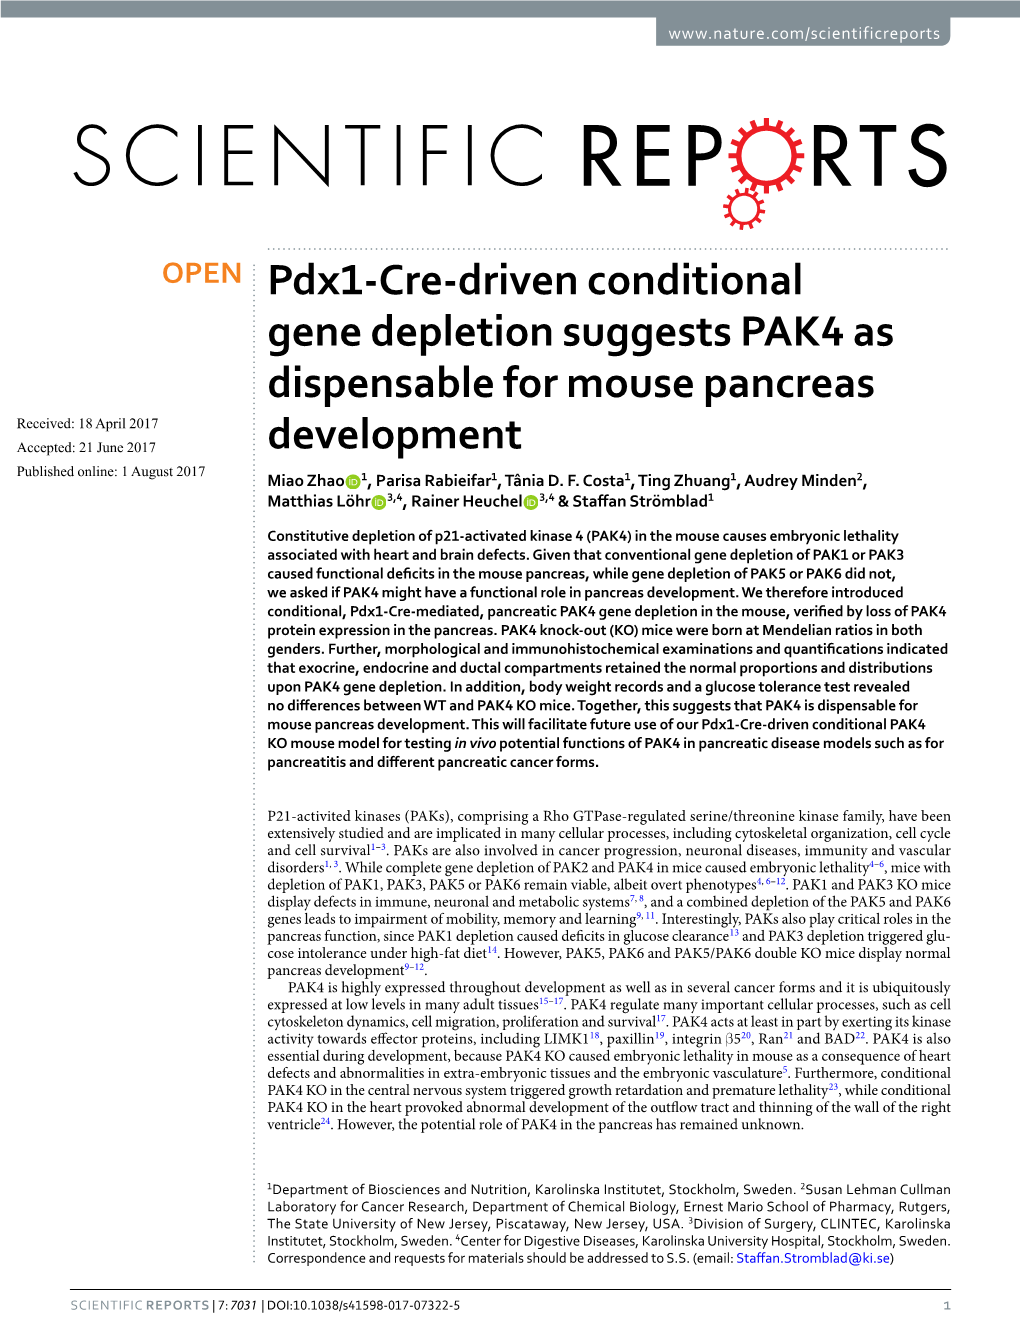 Pdx1-Cre-Driven Conditional Gene Depletion Suggests PAK4 As